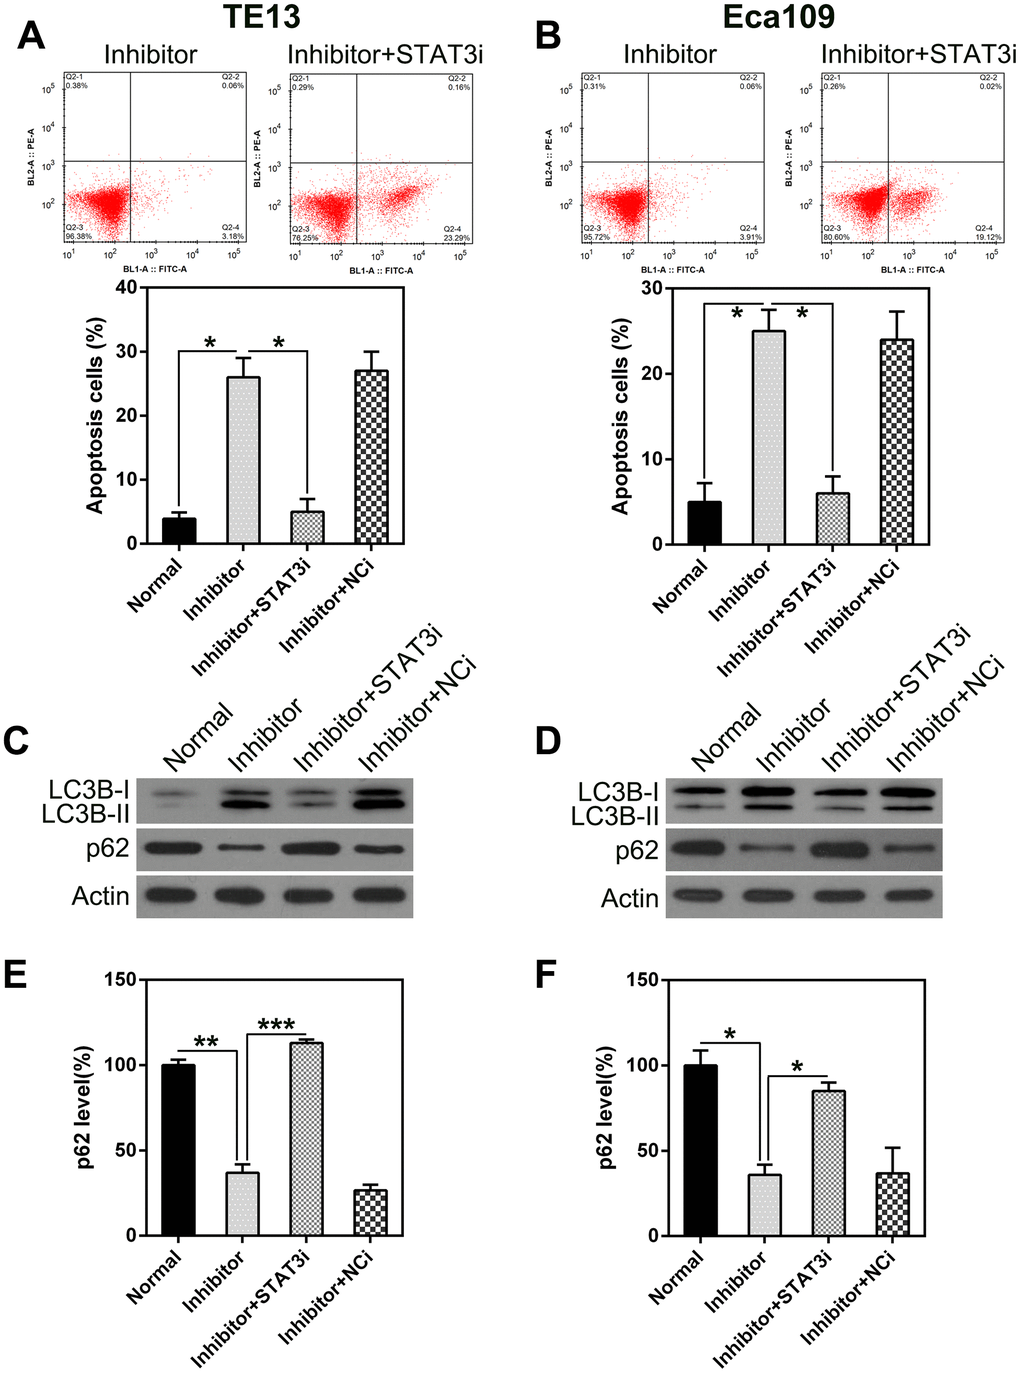 STAT3 silencing suppresses the apoptosis and autophagy in ESCC cells caused by miR-126 silencing. ESCC cells were treated with an miR-126 inhibitor plus shRNA-STAT3 or shRNA-NC. (A, B) STAT3 knock-down eliminated the increase in apoptosis caused by miR-126 inhibition. FC with annexin V-FITC and PI staining was used to assess early apoptosis in TE13 and Eca109 cells at 36 h post transfection. (C, D) WB was used to examine LC3B and p62 protein levels in cells after transfection. (E, F) qPCR was used to measure p62 mRNA expression in TE13 and Eca109 cells after different treatments. Results are displayed as the average ± SD. *P P P 